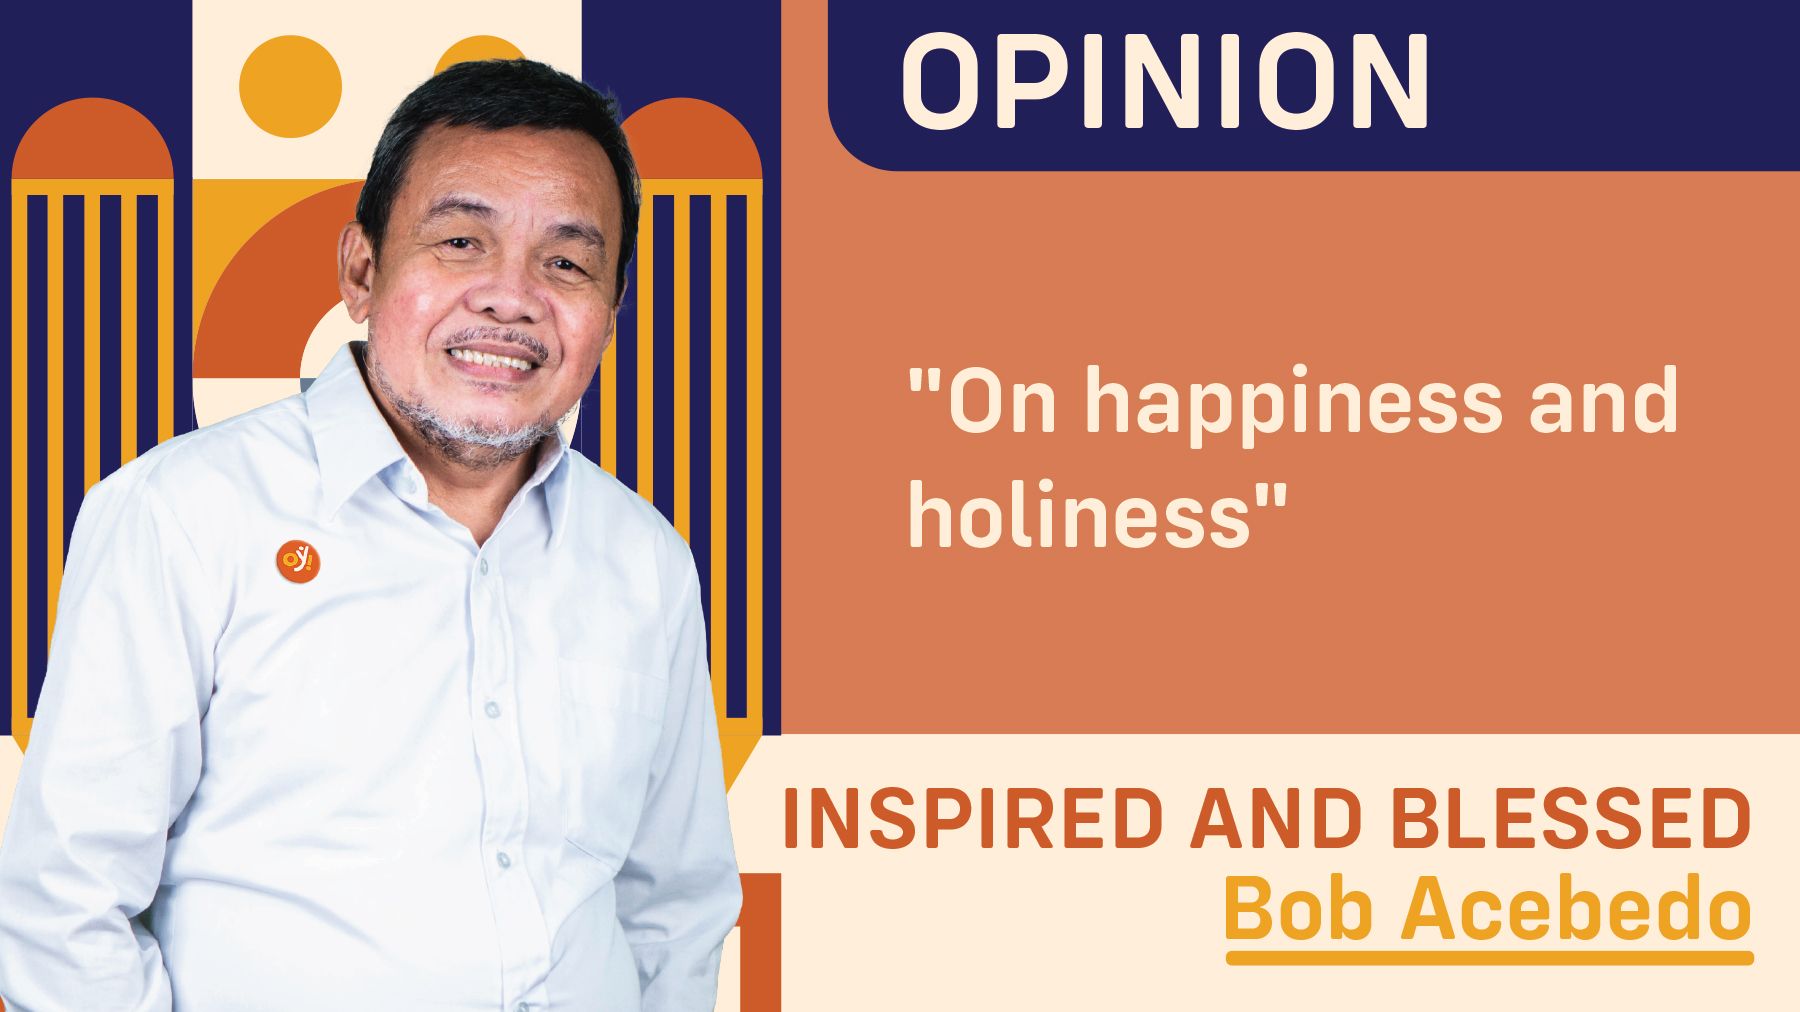 "On happiness and holiness"